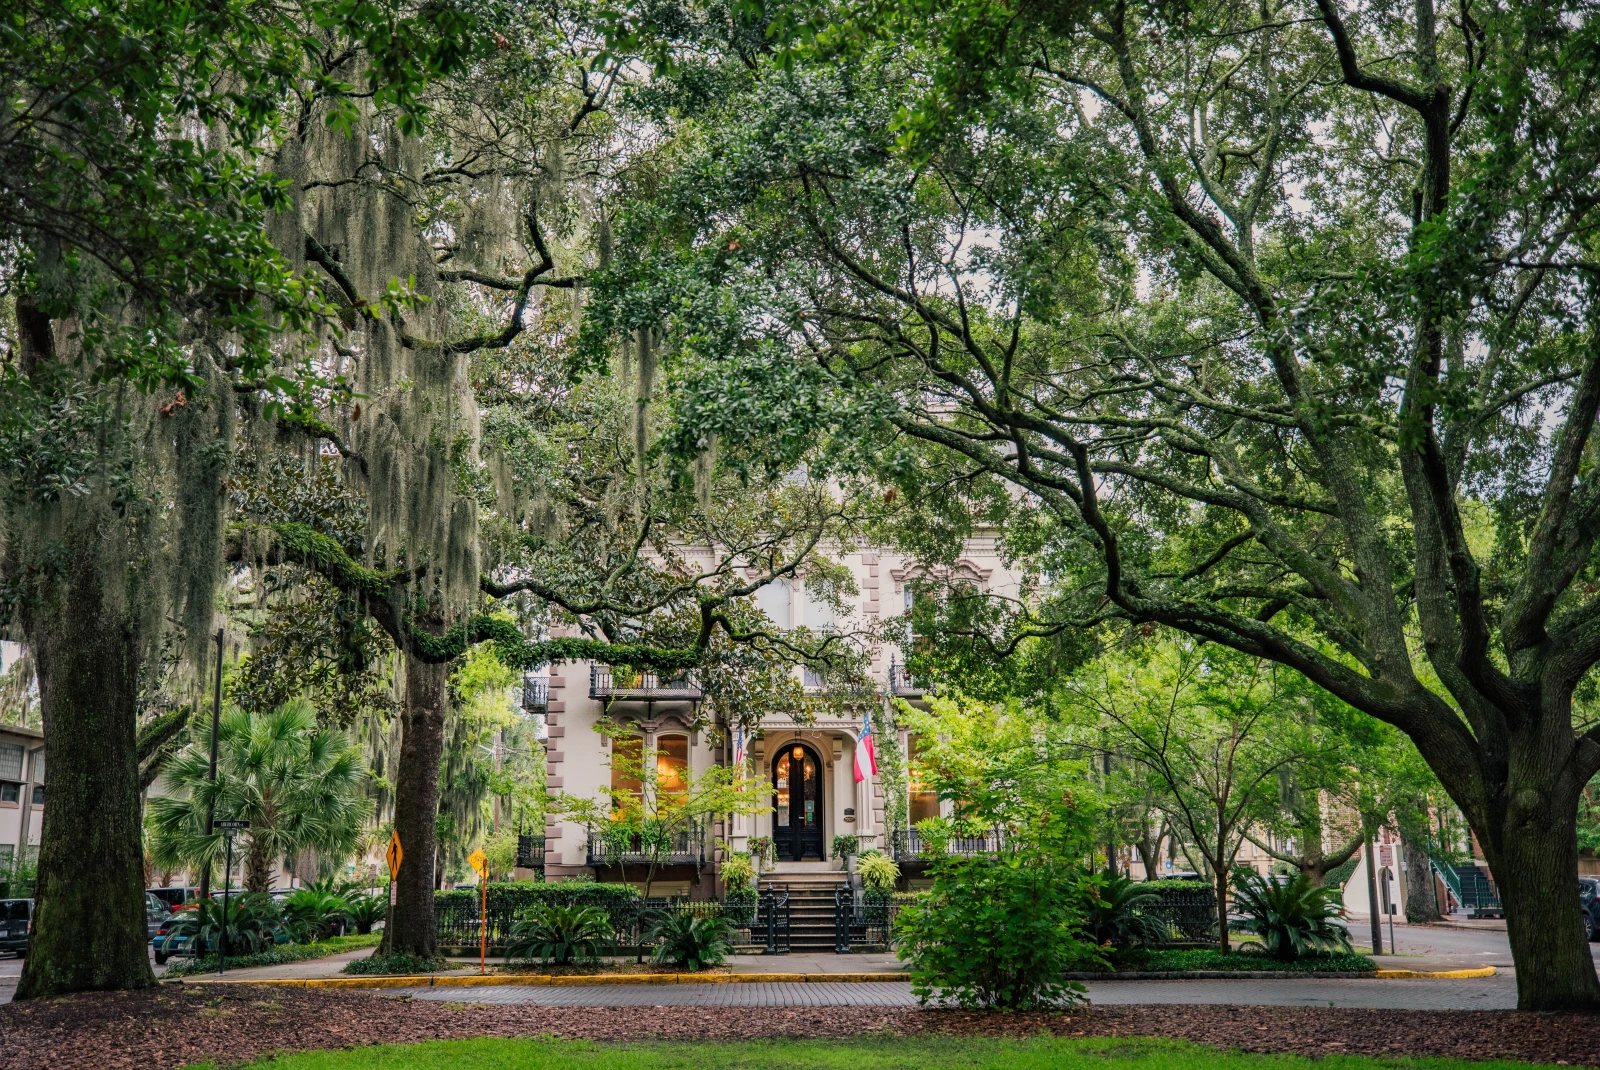 A colonial-style home surrounded by lush vegetation in Savannah, Georgia. 